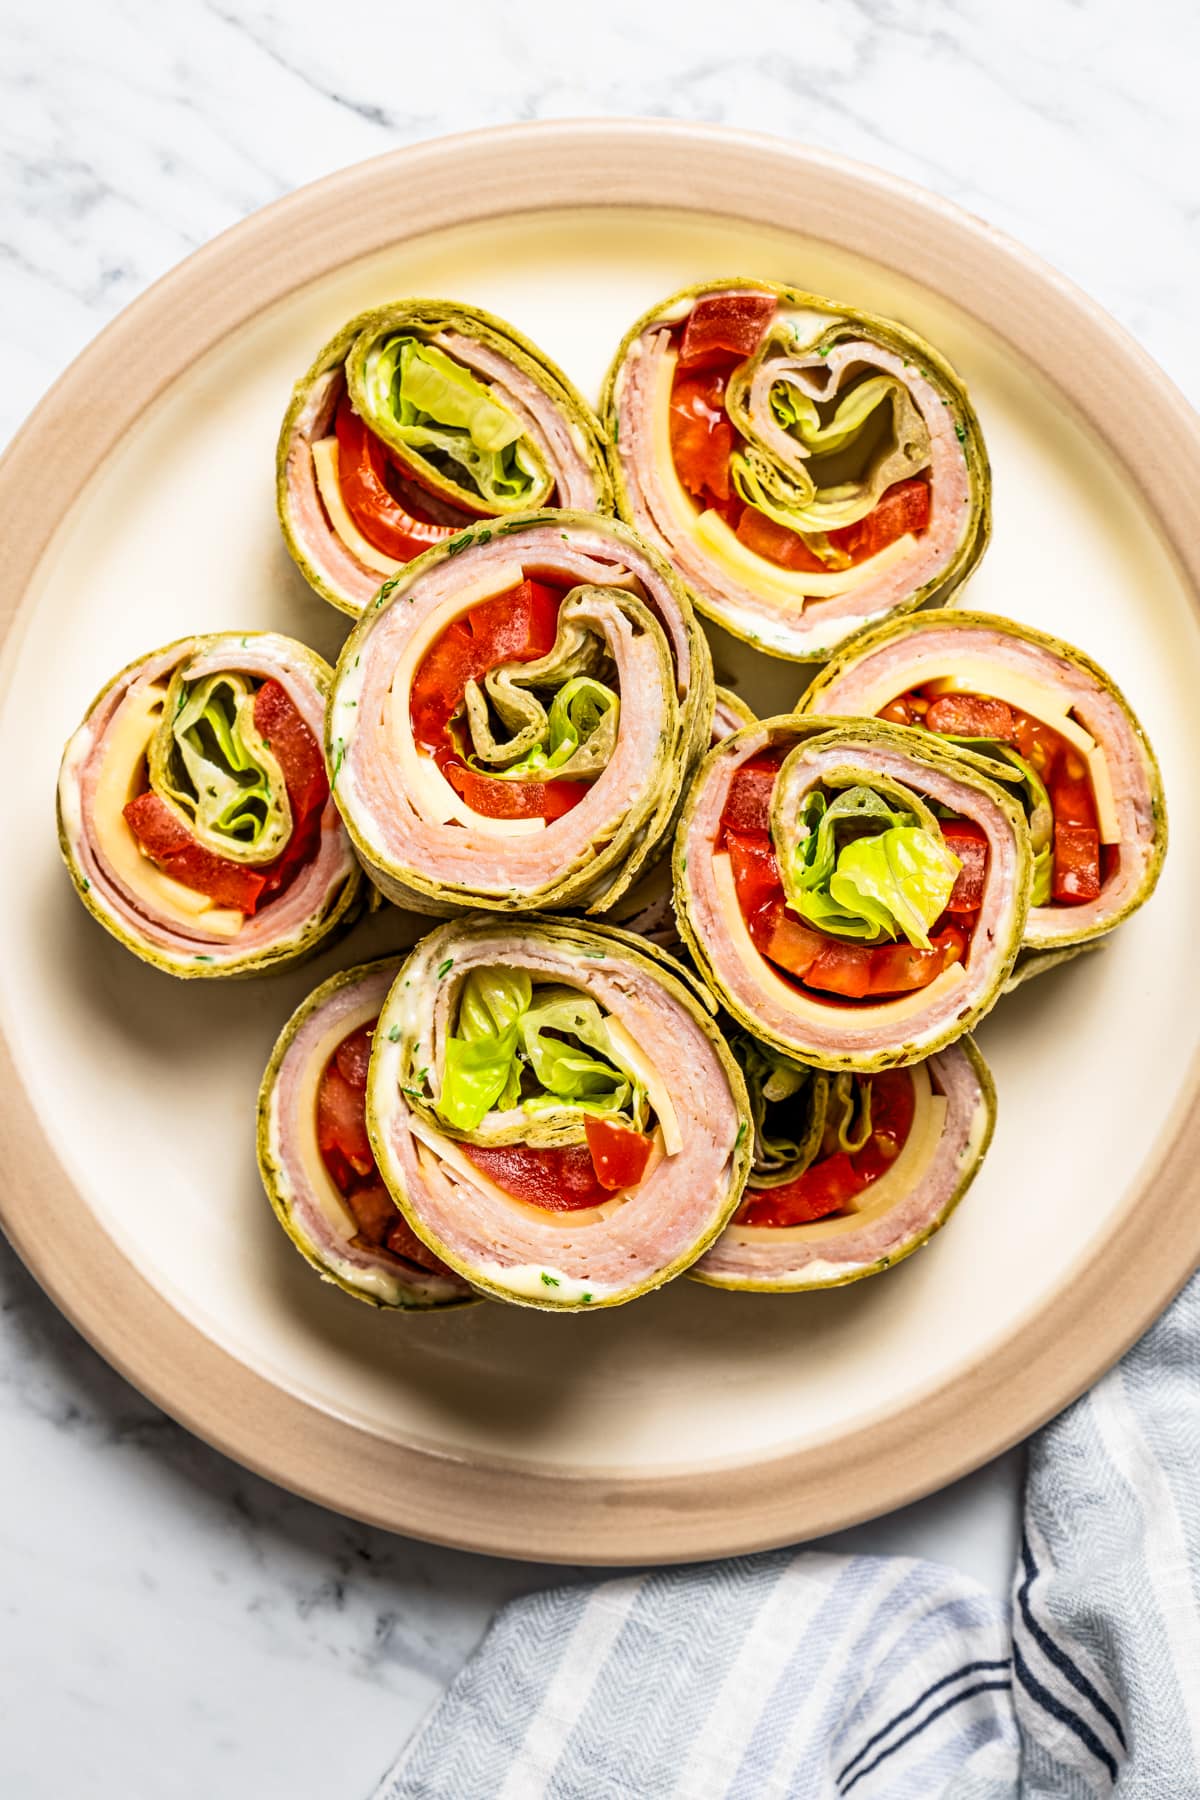 Overhead image of pinwheel sandwiches arranged on a serving plate.